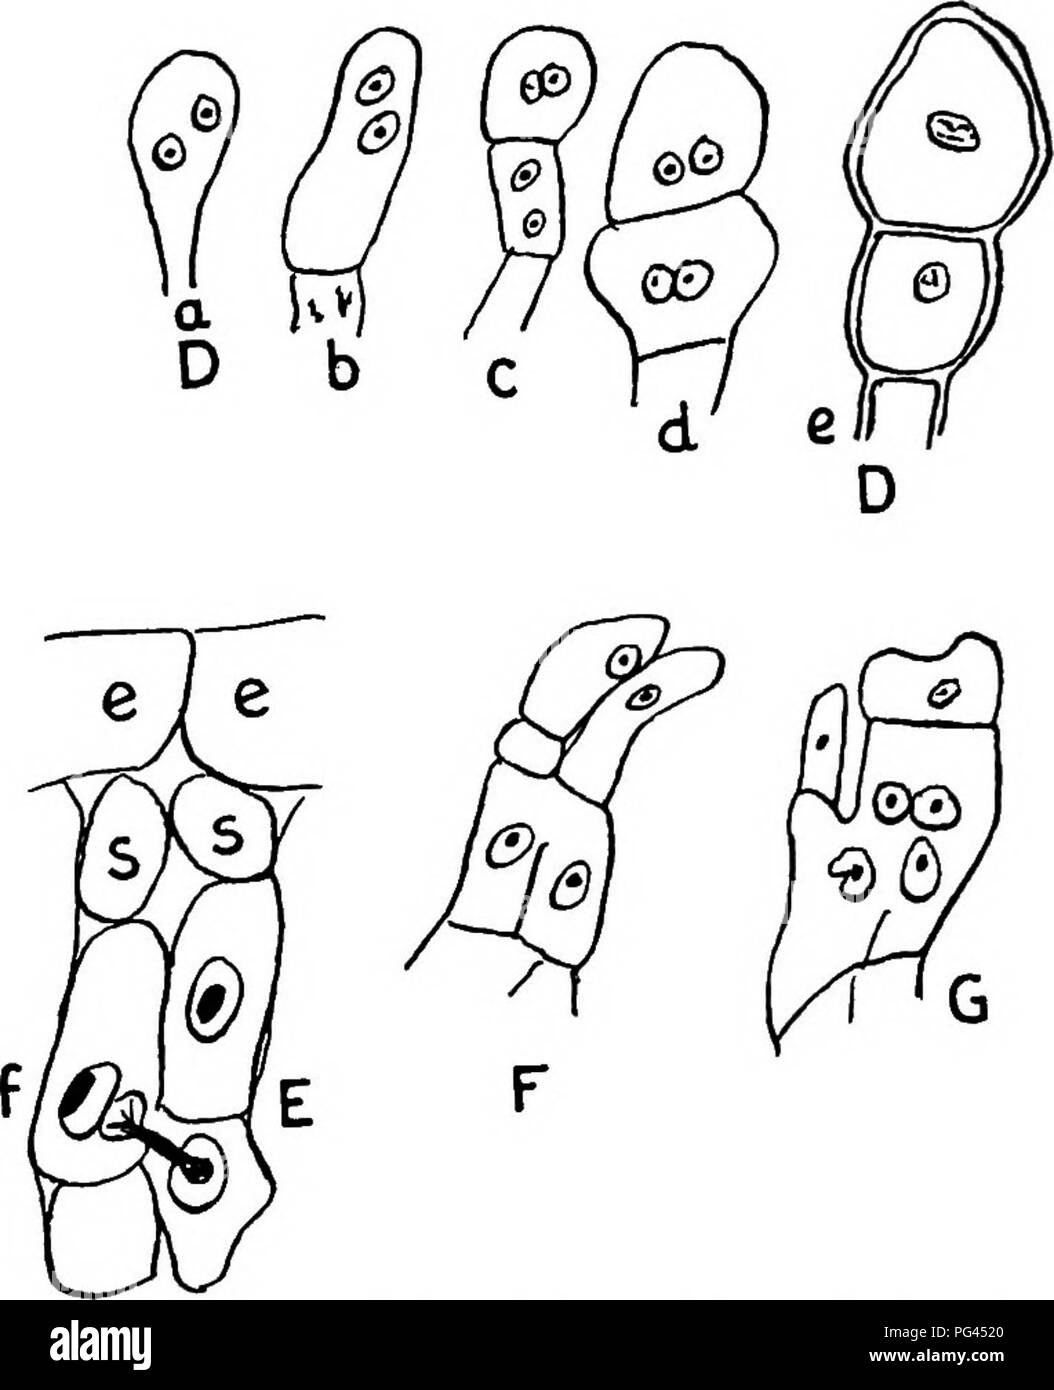 . A text-book of mycology and plant pathology . Plant diseases; Fungi in agriculture; Plant diseases; Fungi. Fig. 66.—A, Chain of young asciospores of Puccinia caricis; a, fusion tissue; b, basal (fusion) cell with conjugate nuclei; t, seciospore mother-cell; d, intercalary cell; e, young seciospore; B, germinating aeciospore of P. caricis; C, teliospore of P. caricis; D, formation of teliospores of P. falcarice (after Ditlscklag); E, development of aecium (after Blackman) of Phragmidium violaceum; e, epidermal cell; i, sterile cell; below these cells a nucleus is seen migrating into the adjac Stock Photo